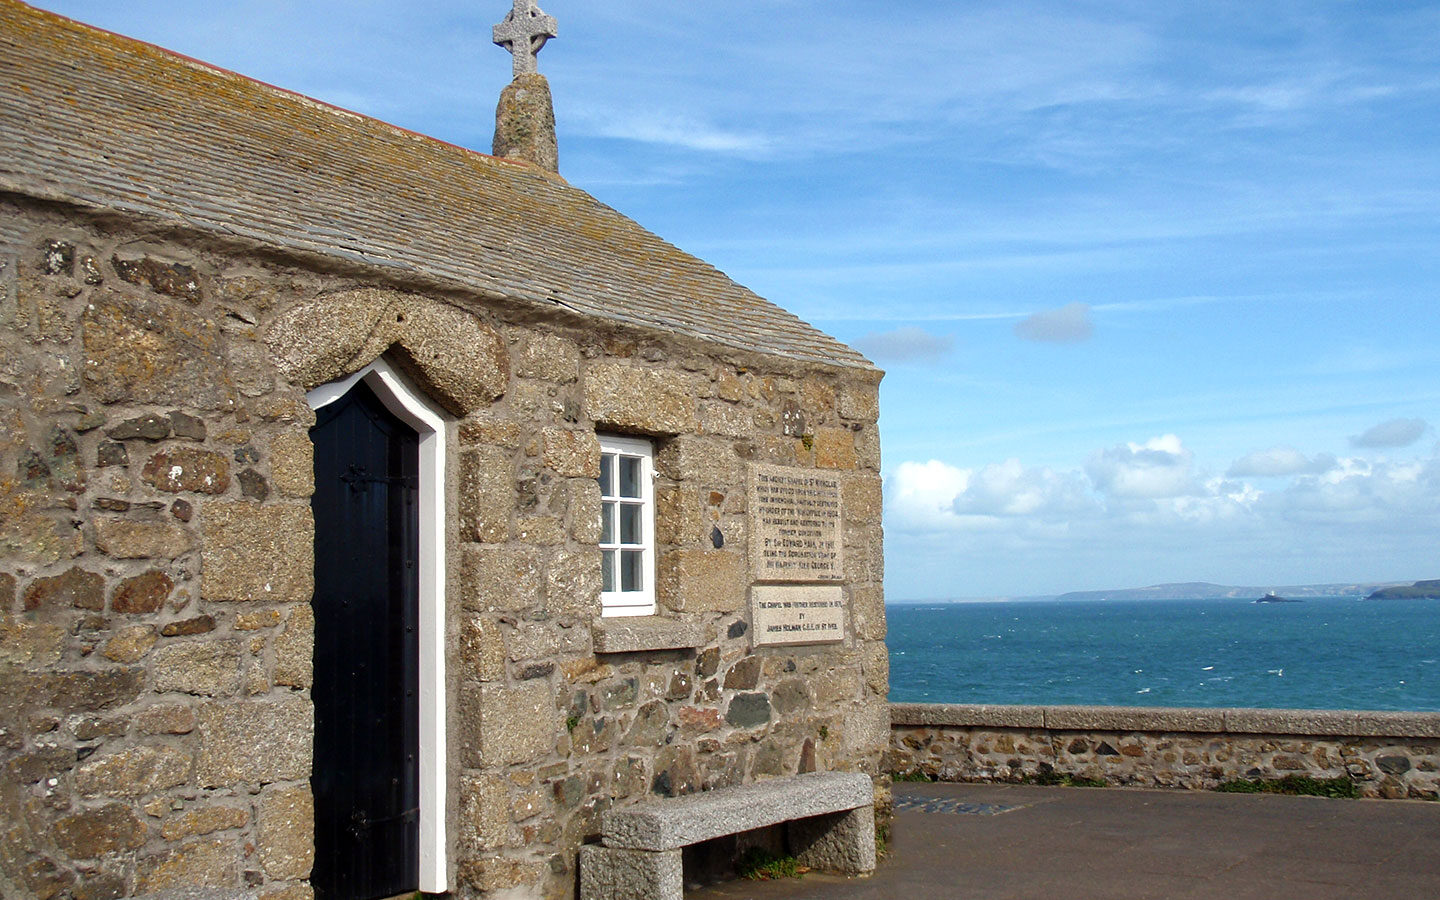 St Nicholas Chapel on The Island in St Ives